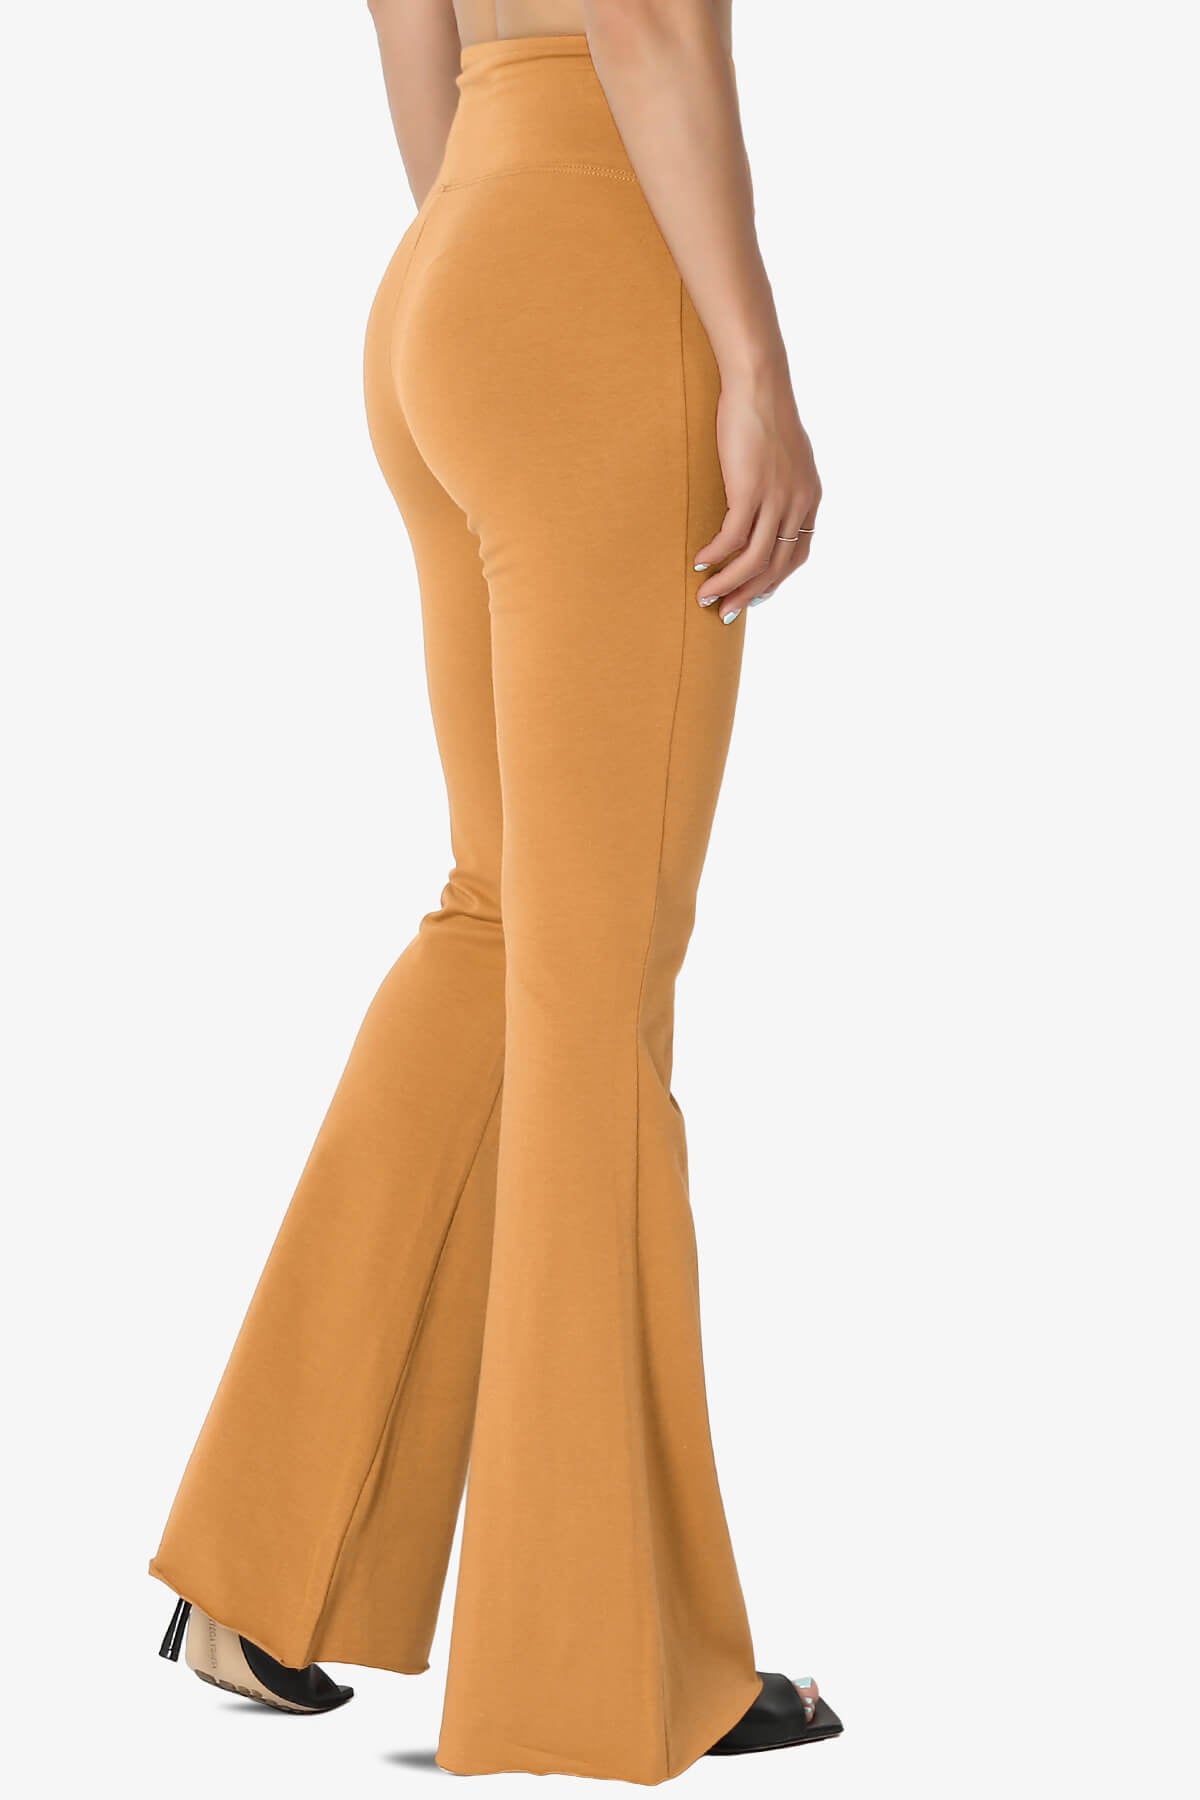 Load image into Gallery viewer, Zaylee Raw Hem Flared Comfy Yoga Pants GOLDEN MUSTARD_4
